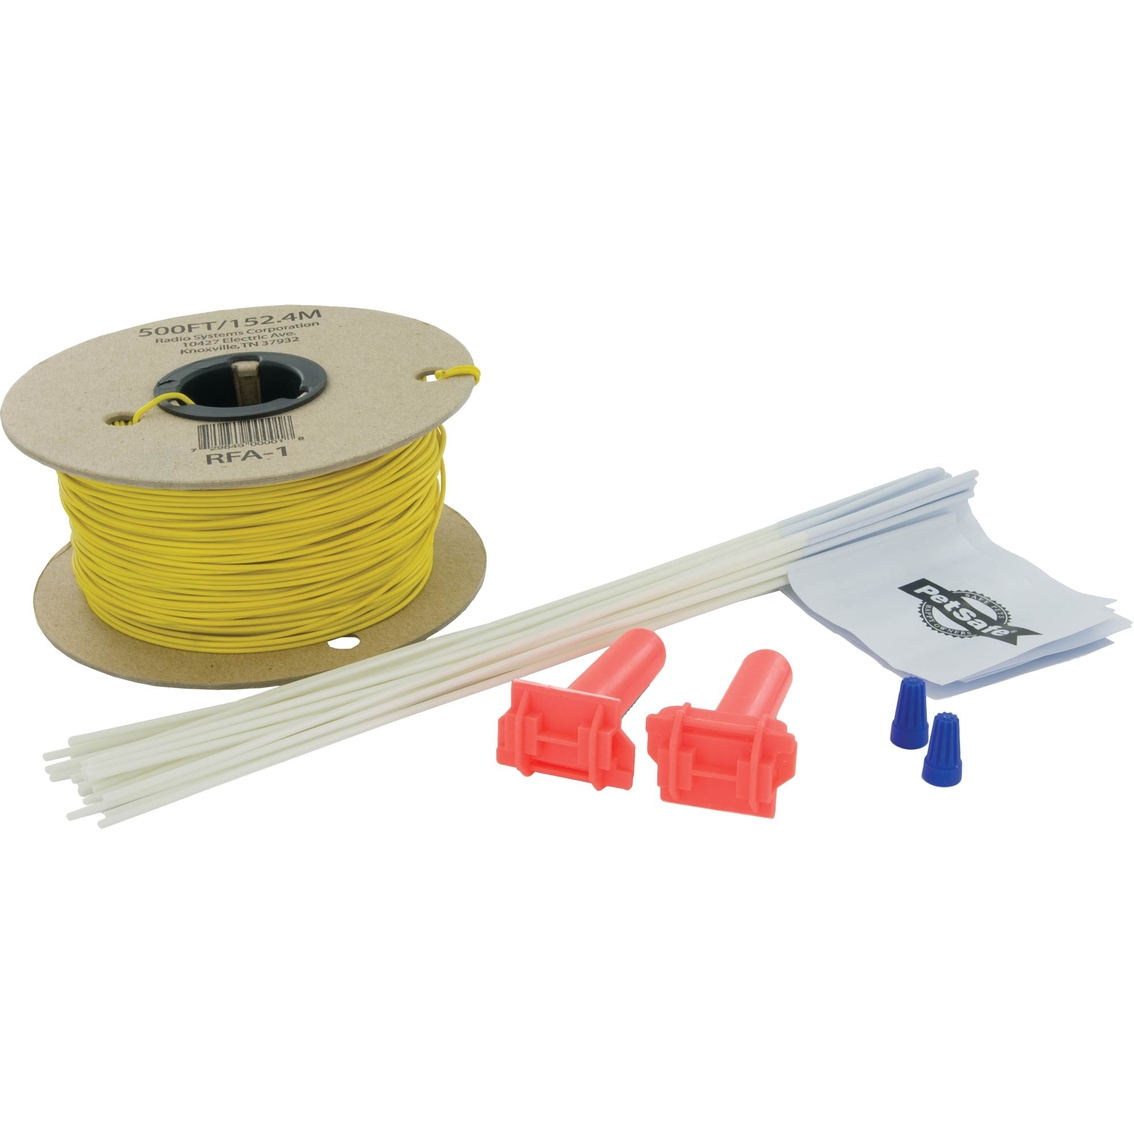 PetSafe Boundary Kit with 500 Ft. Wire, Splicers and Flags - Image 2 of 2